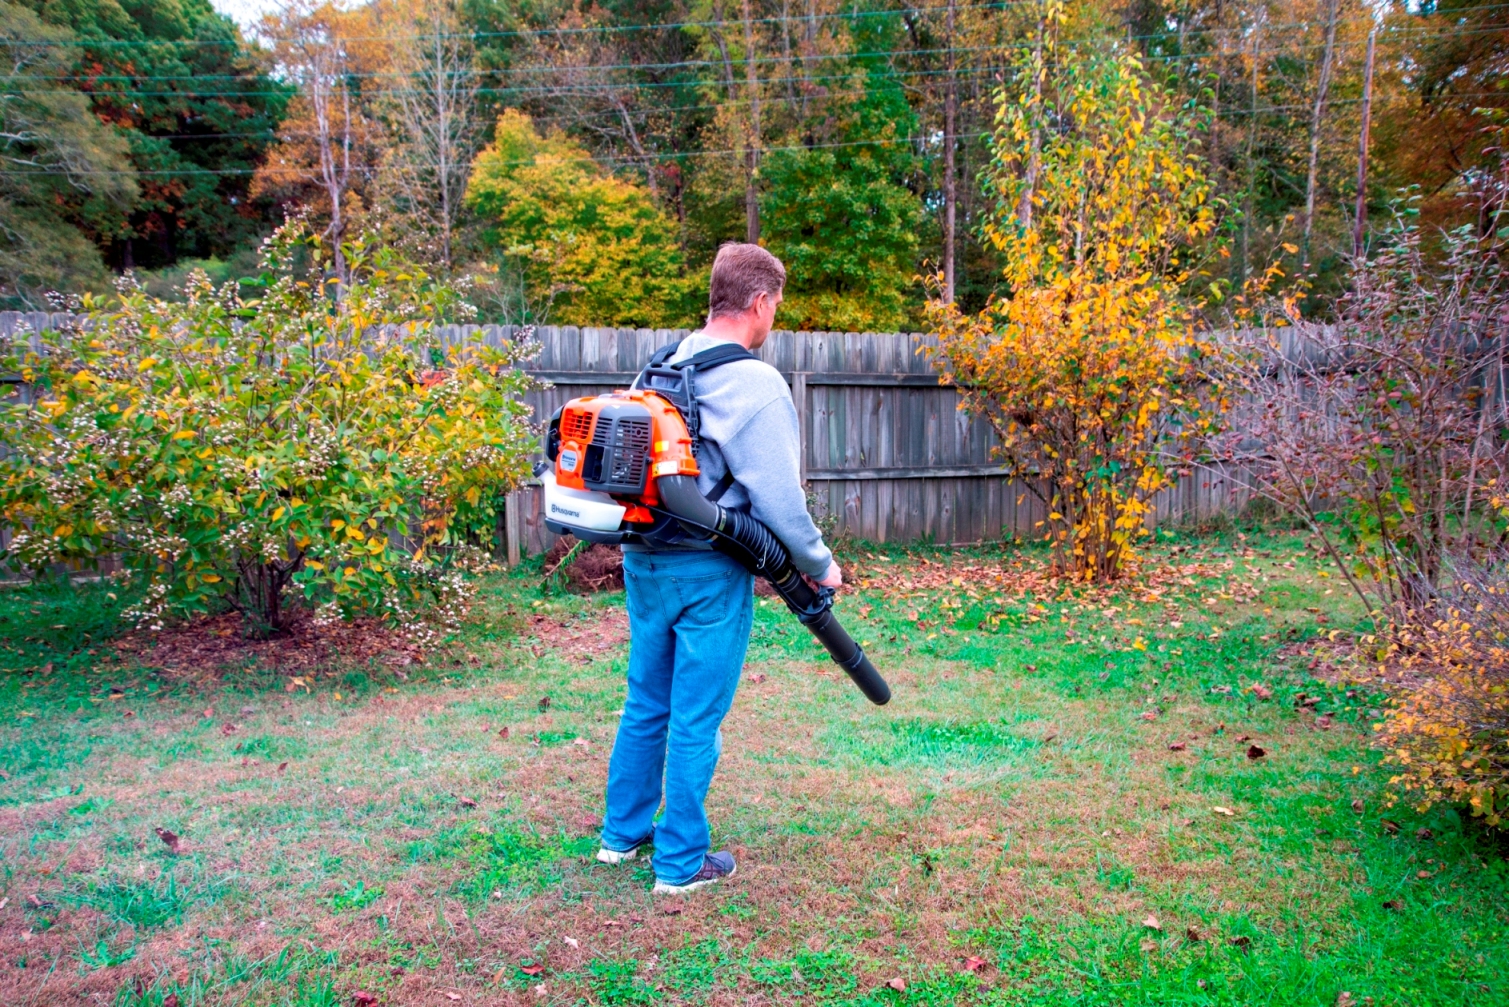 A person using an electric backpack leaf blower to do yard work in the fall.